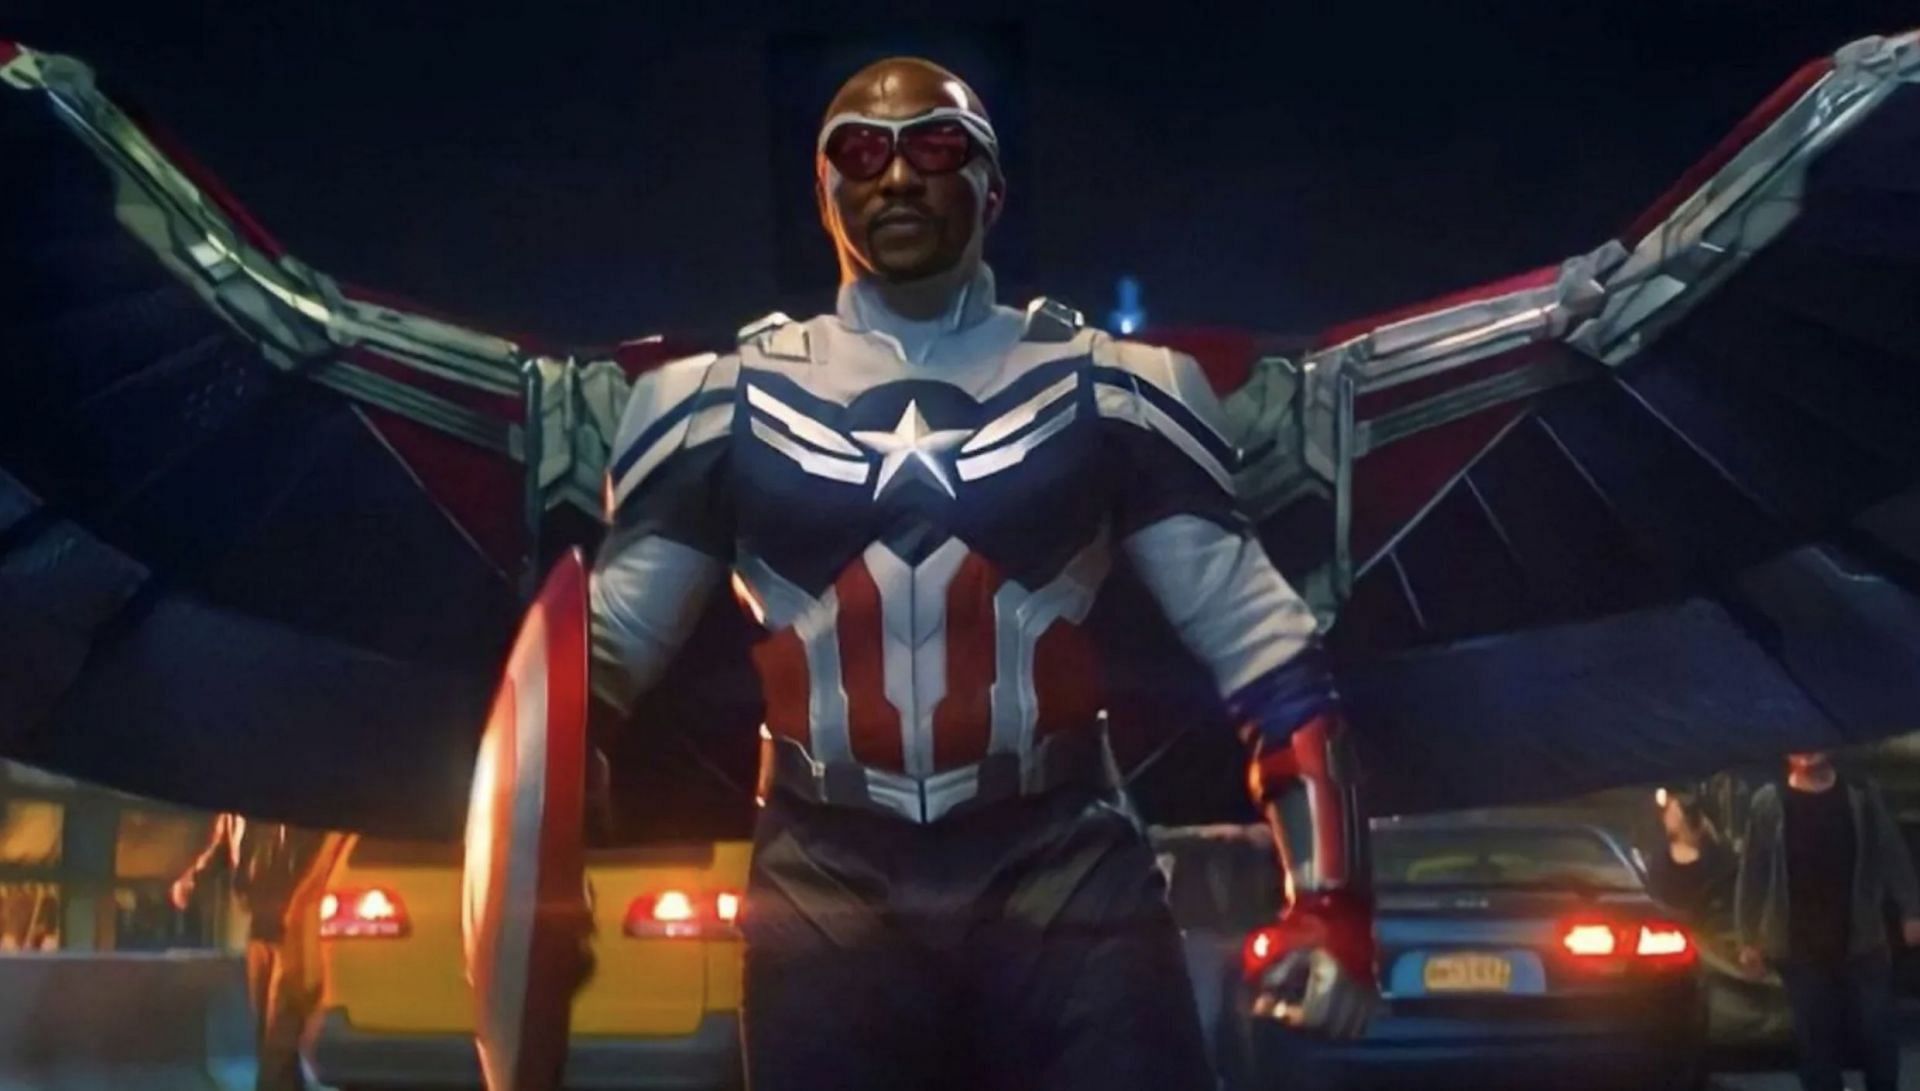 Sam Wilson, played by actor Anthony Mackie, holding the Captain America shield in the Disney+ series The Falcon and The Winter Soldier (Image via Marvel Studios)